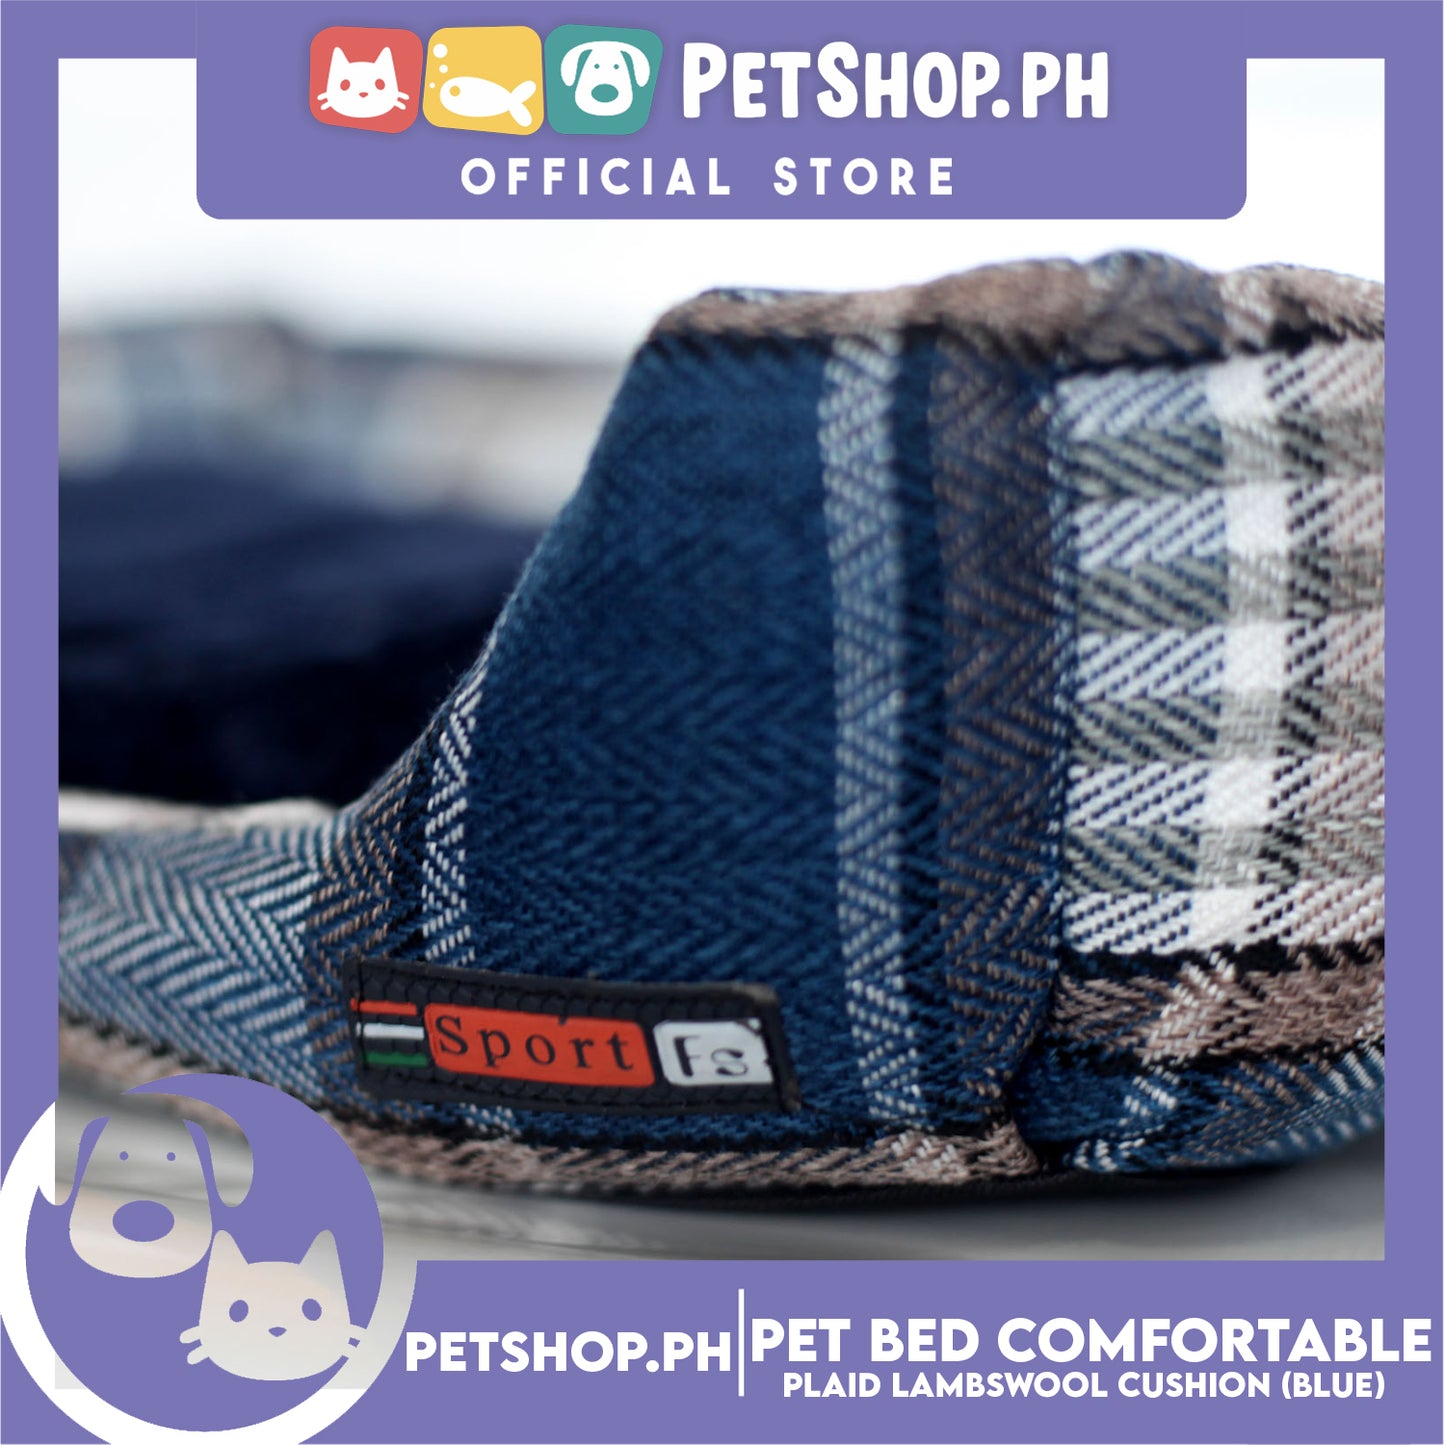 Pet Bed Comfortable Sleeping Bed Plaid Cotton Design with Lambswool Cushion 52x40x10cm Small (Blue)